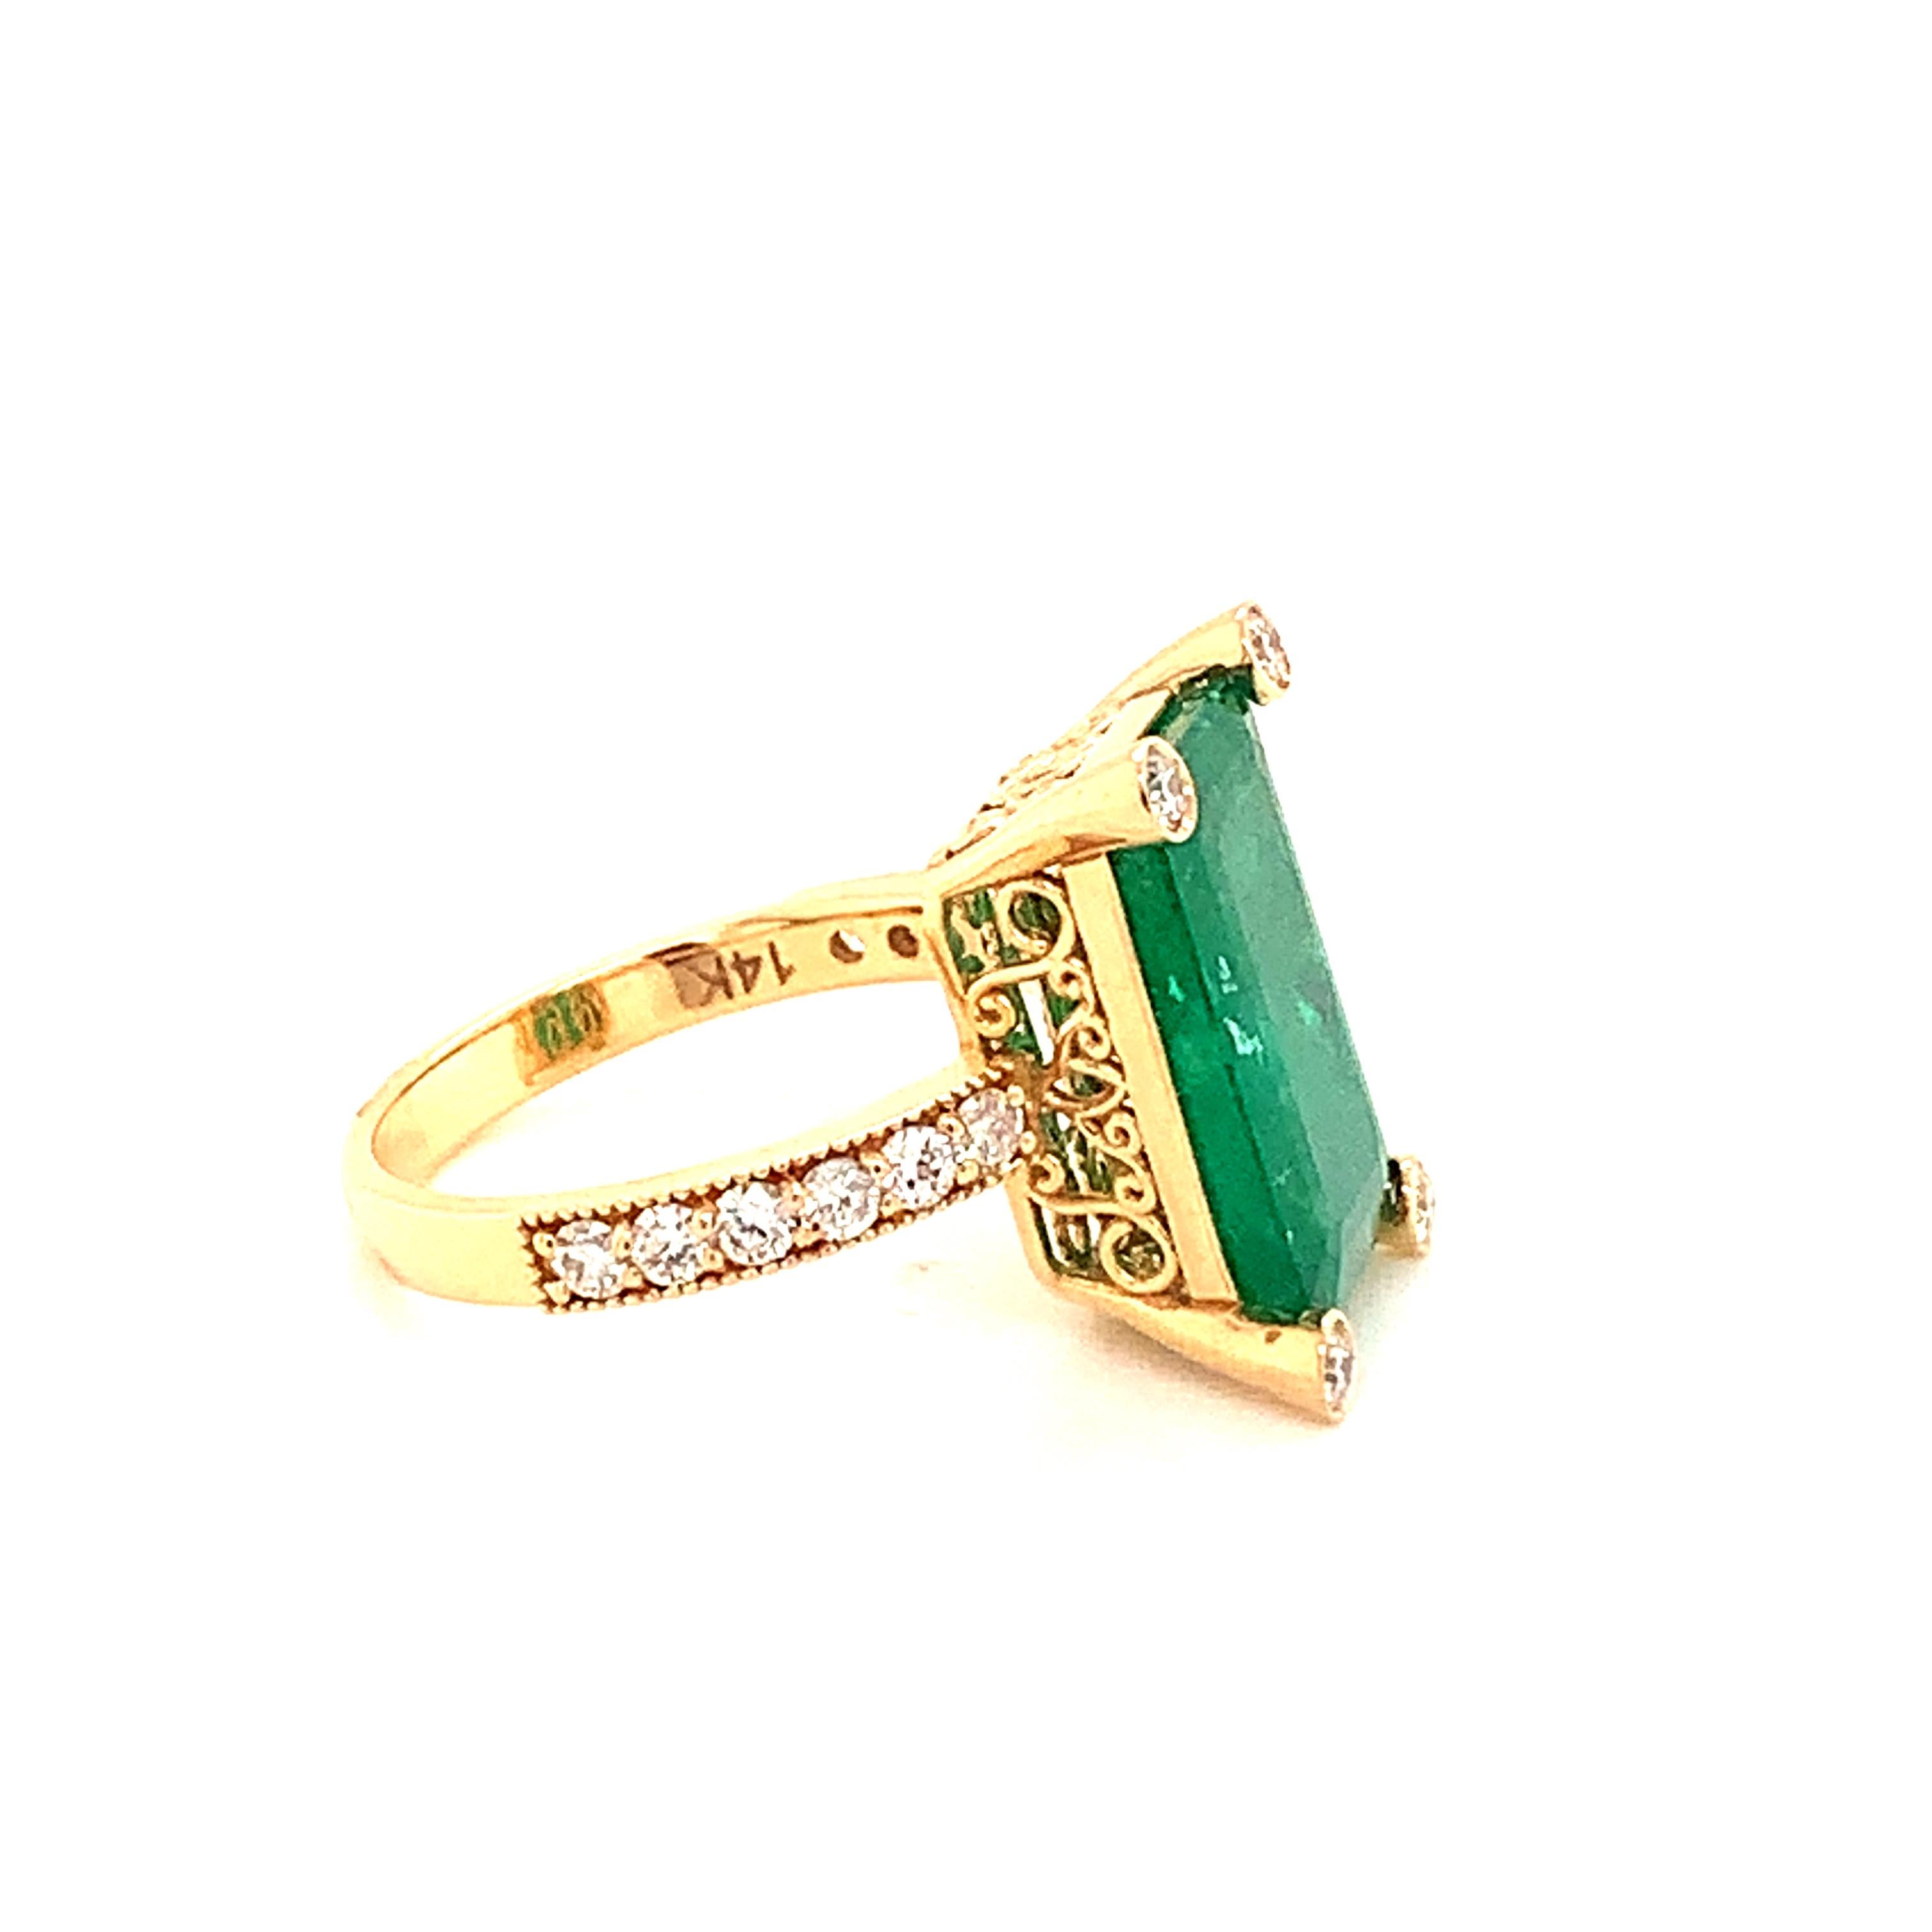 Natural Emerald Diamond Ring 14k Gold 4.37 TCW GIA Certified For Sale 6